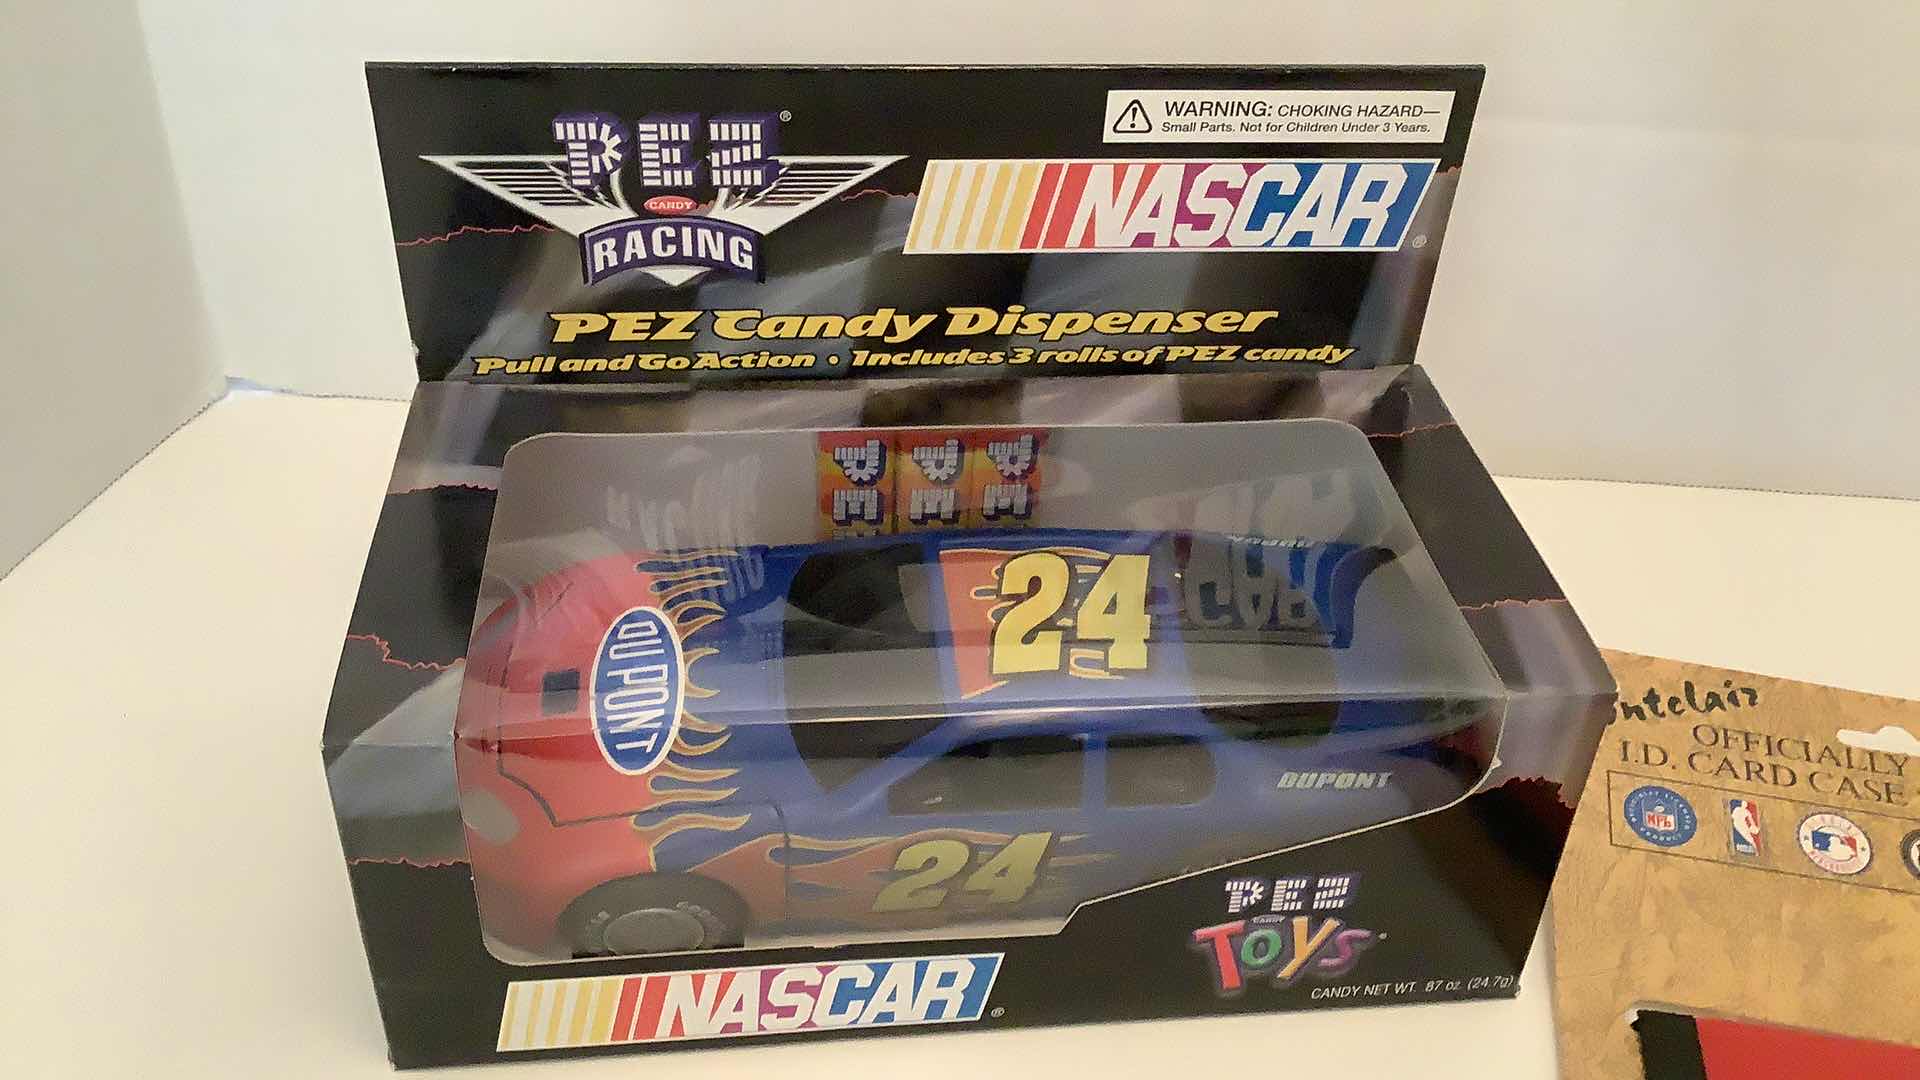 Photo 3 of NASCAR #24 PEZ CANDY DISPENSER AND CARD CASE